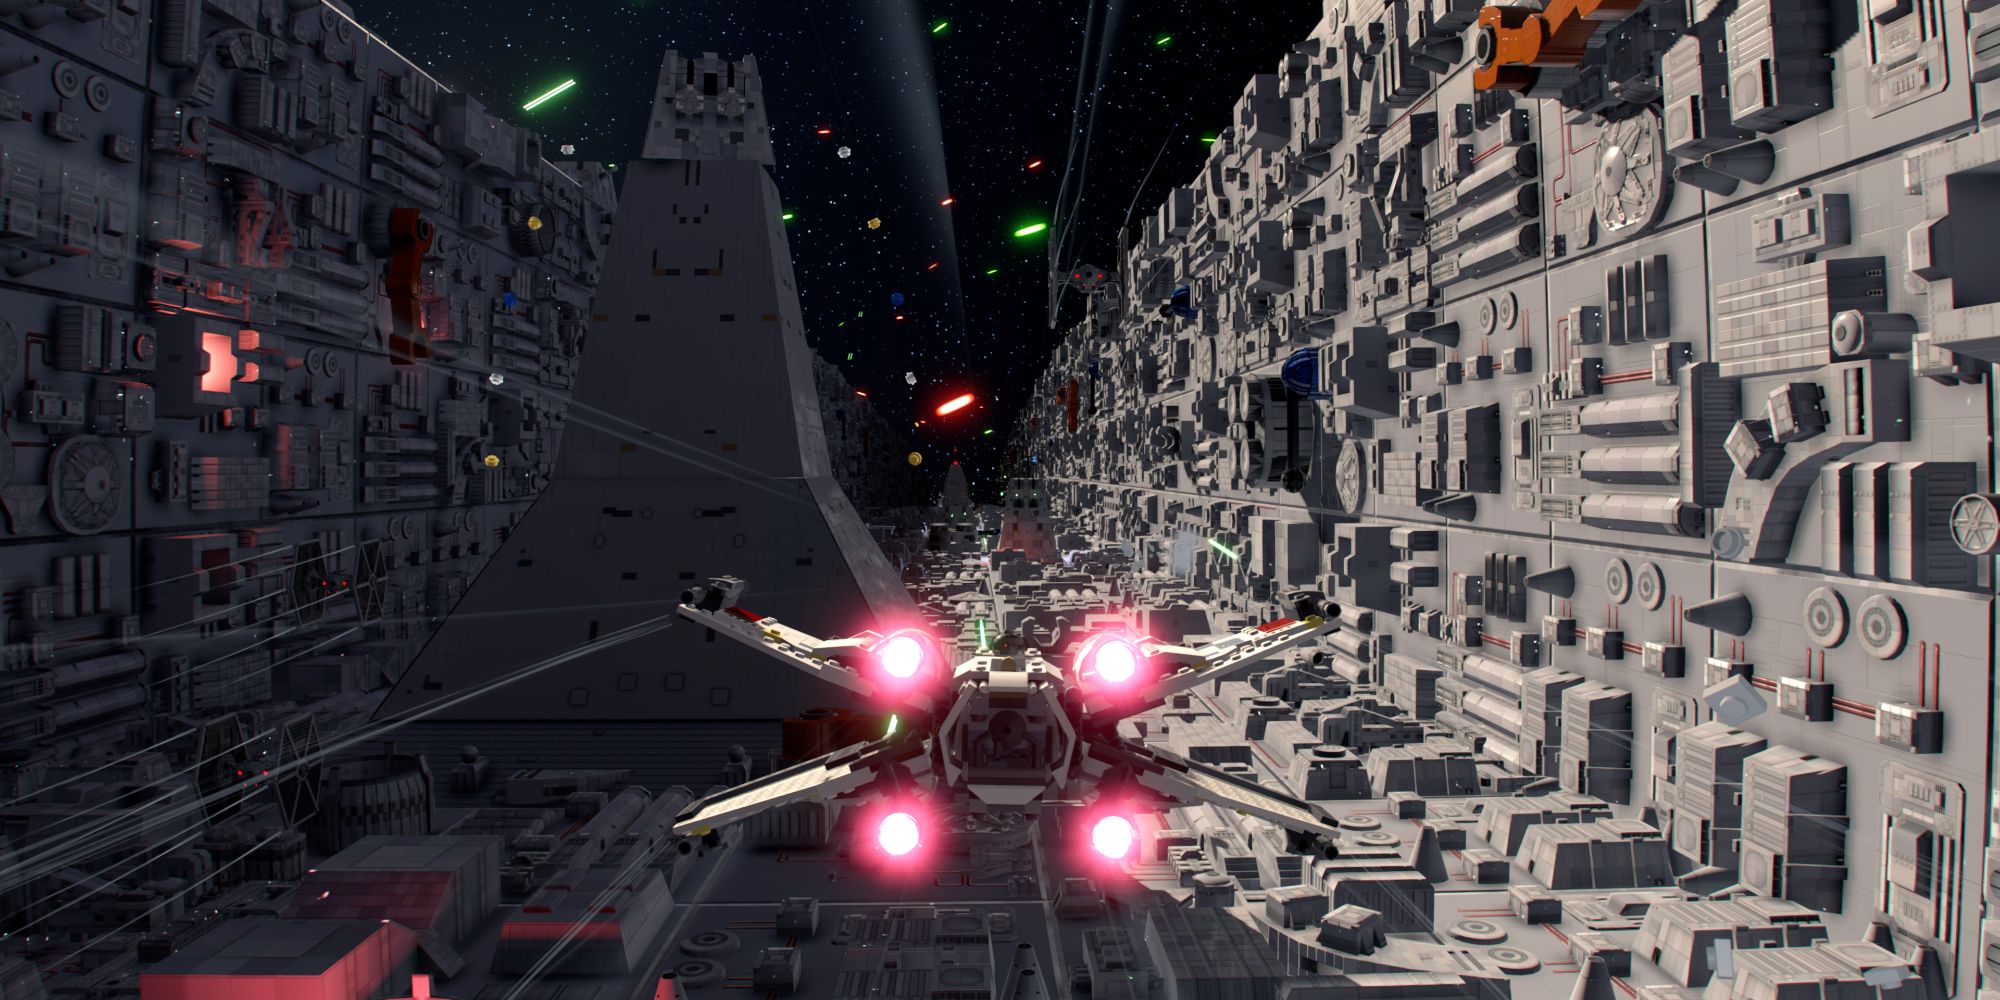 LEGO Star Wars: The Skywalker Saga will have many pilot-able vehicles